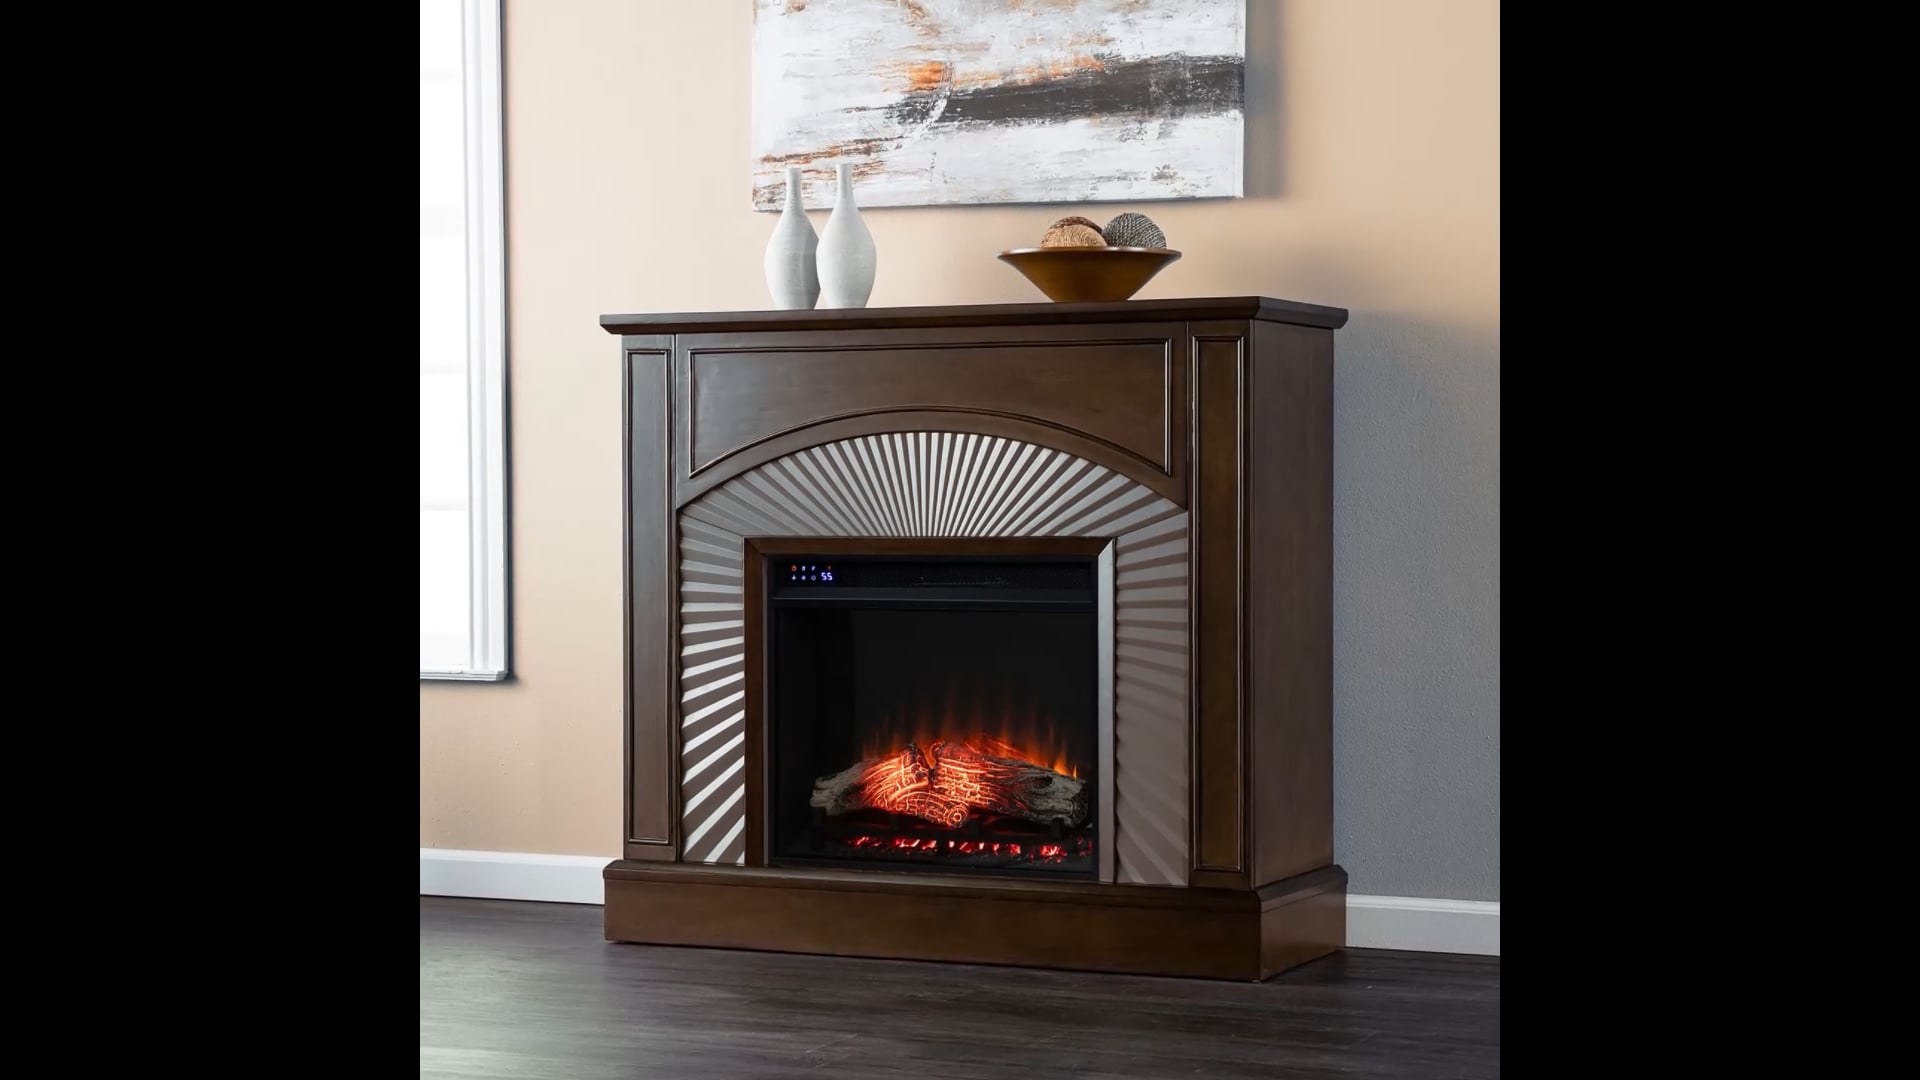 Shelby Freestanding Touch Screen Electric Fireplace